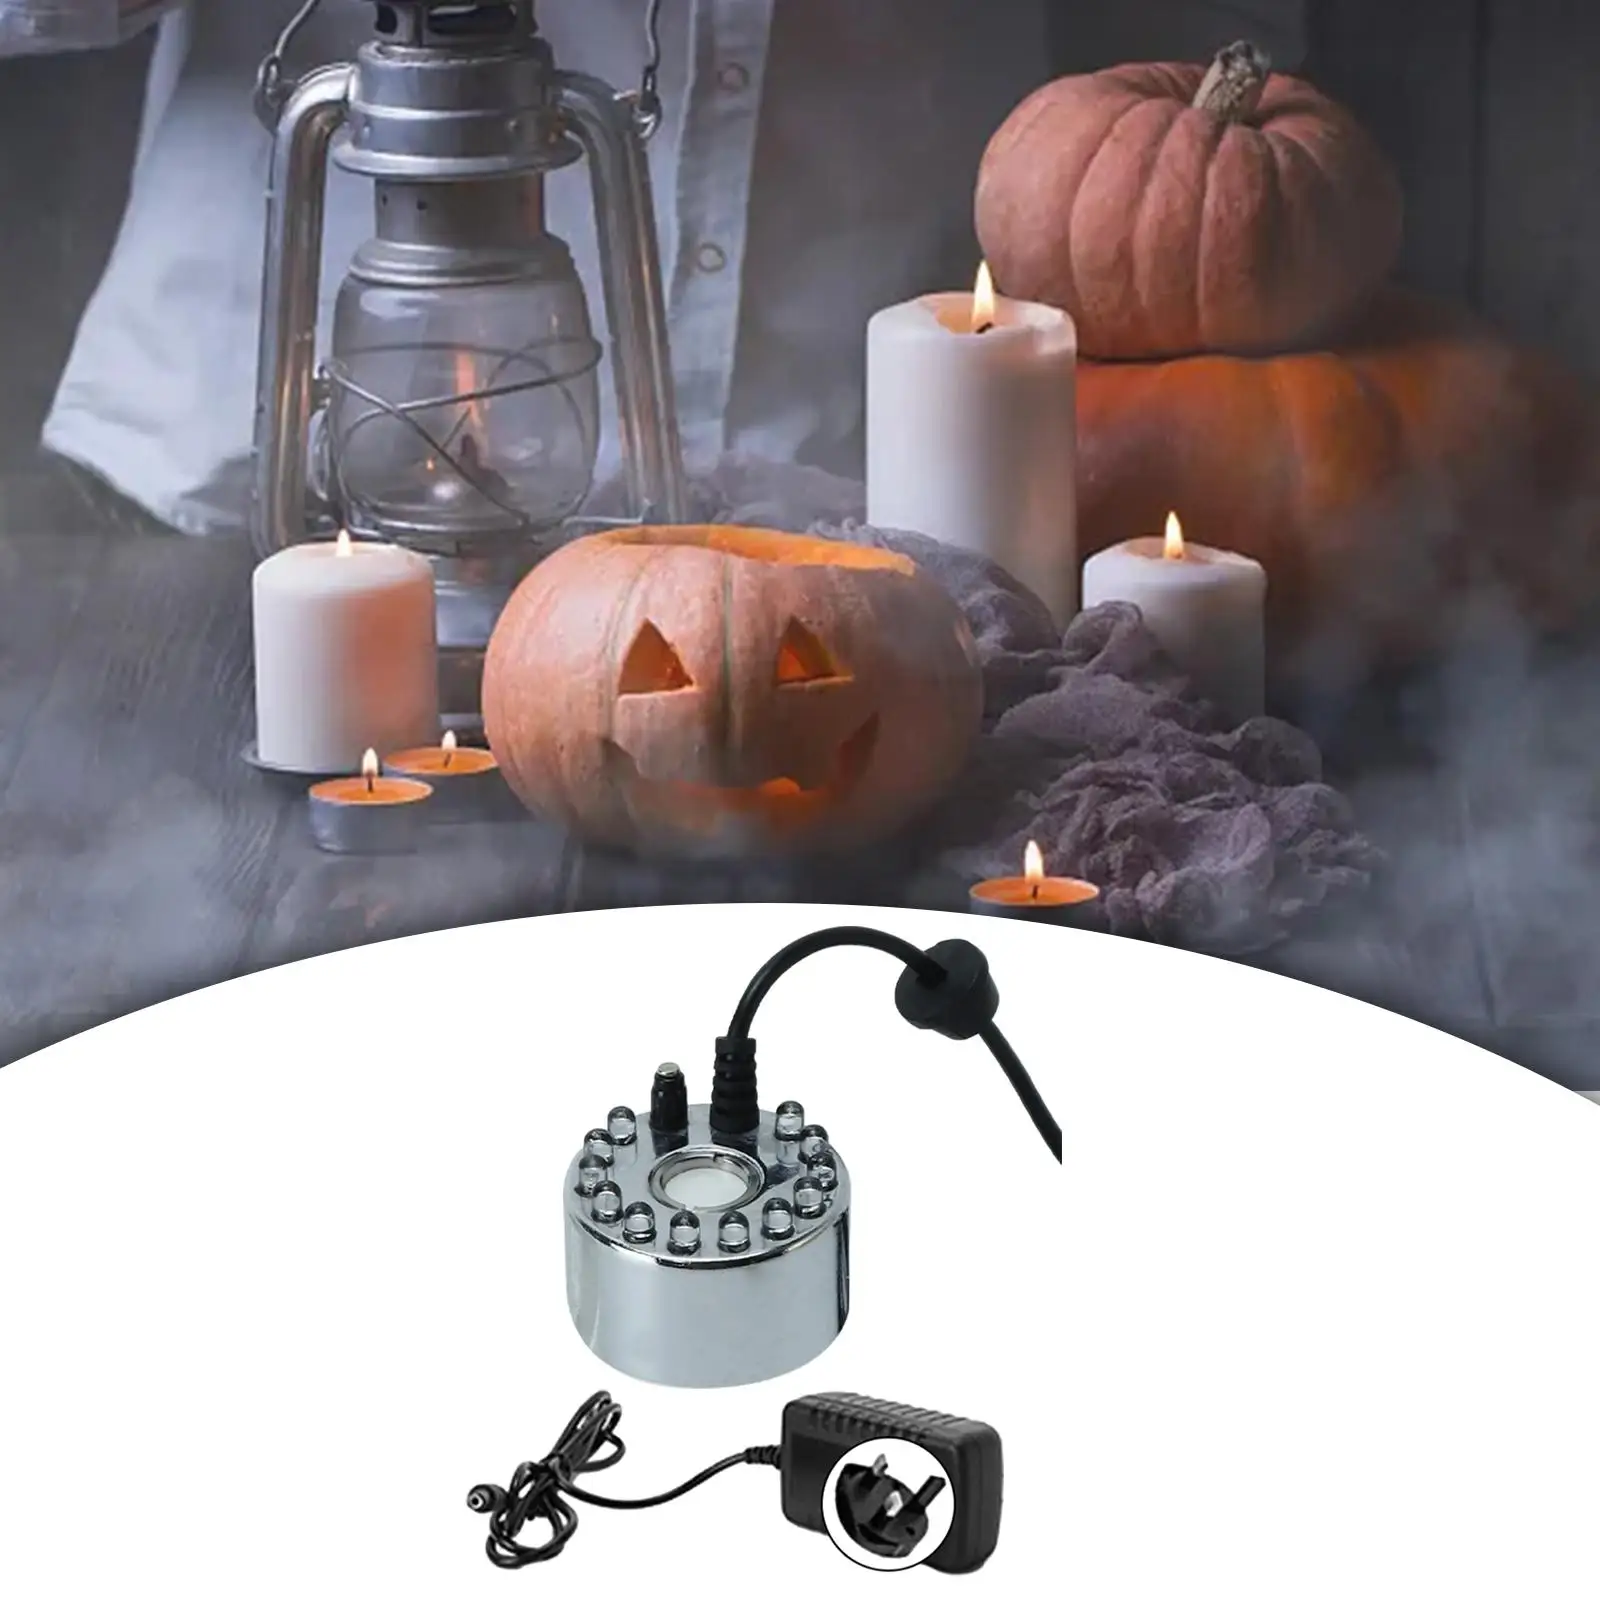 Pond Fog Machine Atomizer Air Humidifier 12 LED UK 220V Sturdy for Halloween